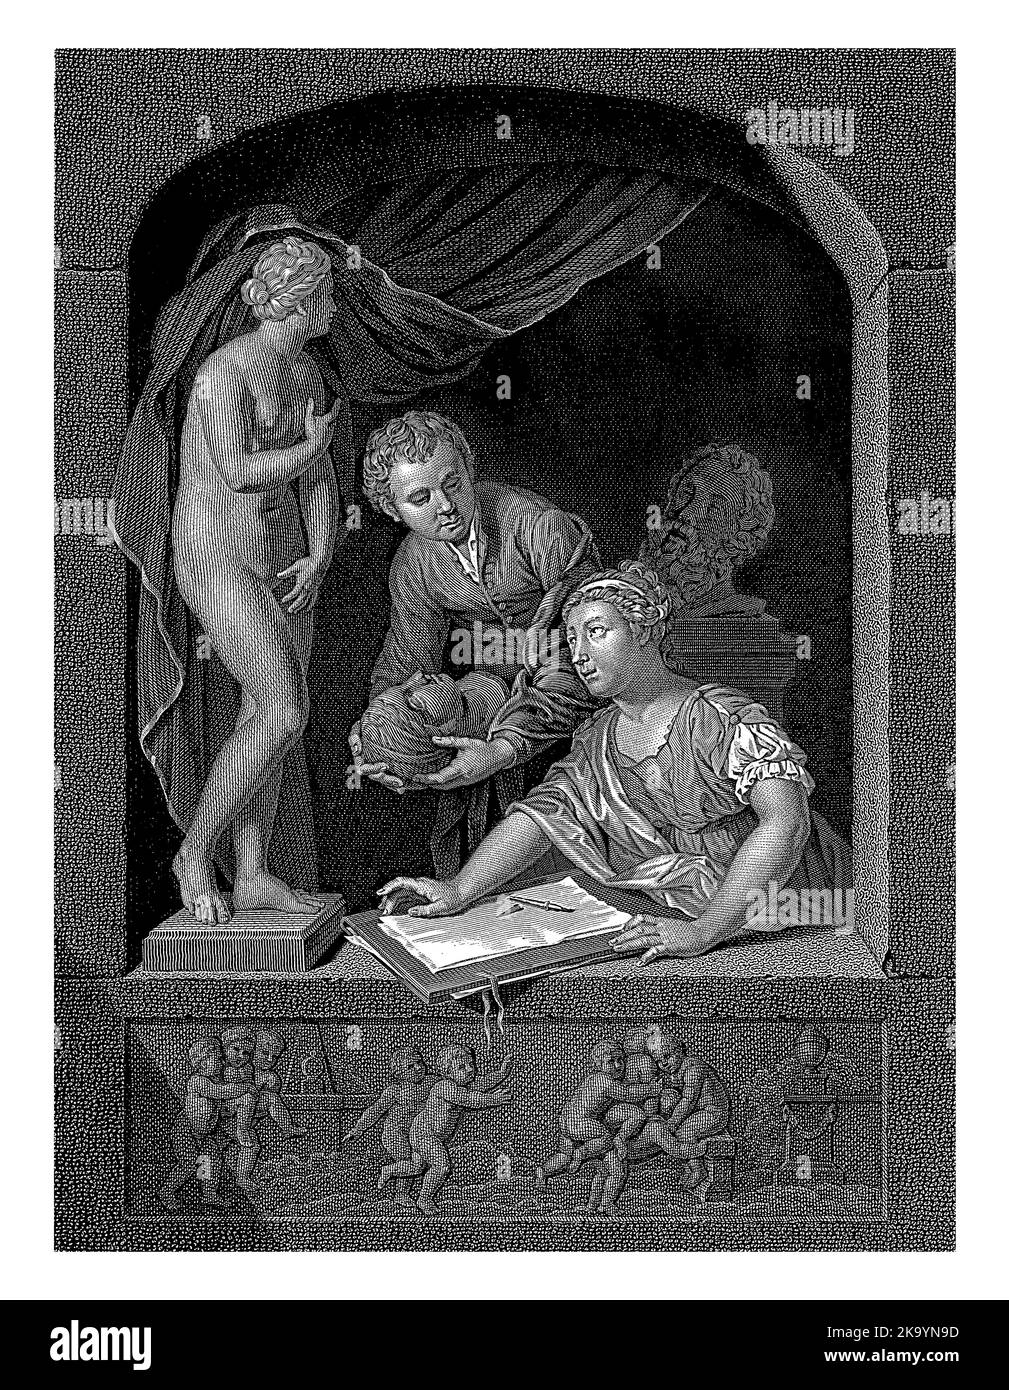 A woman in a window with drawing tools in front of her, drawing to the Capitoline Venus in front of her on the windowsill. Stock Photo